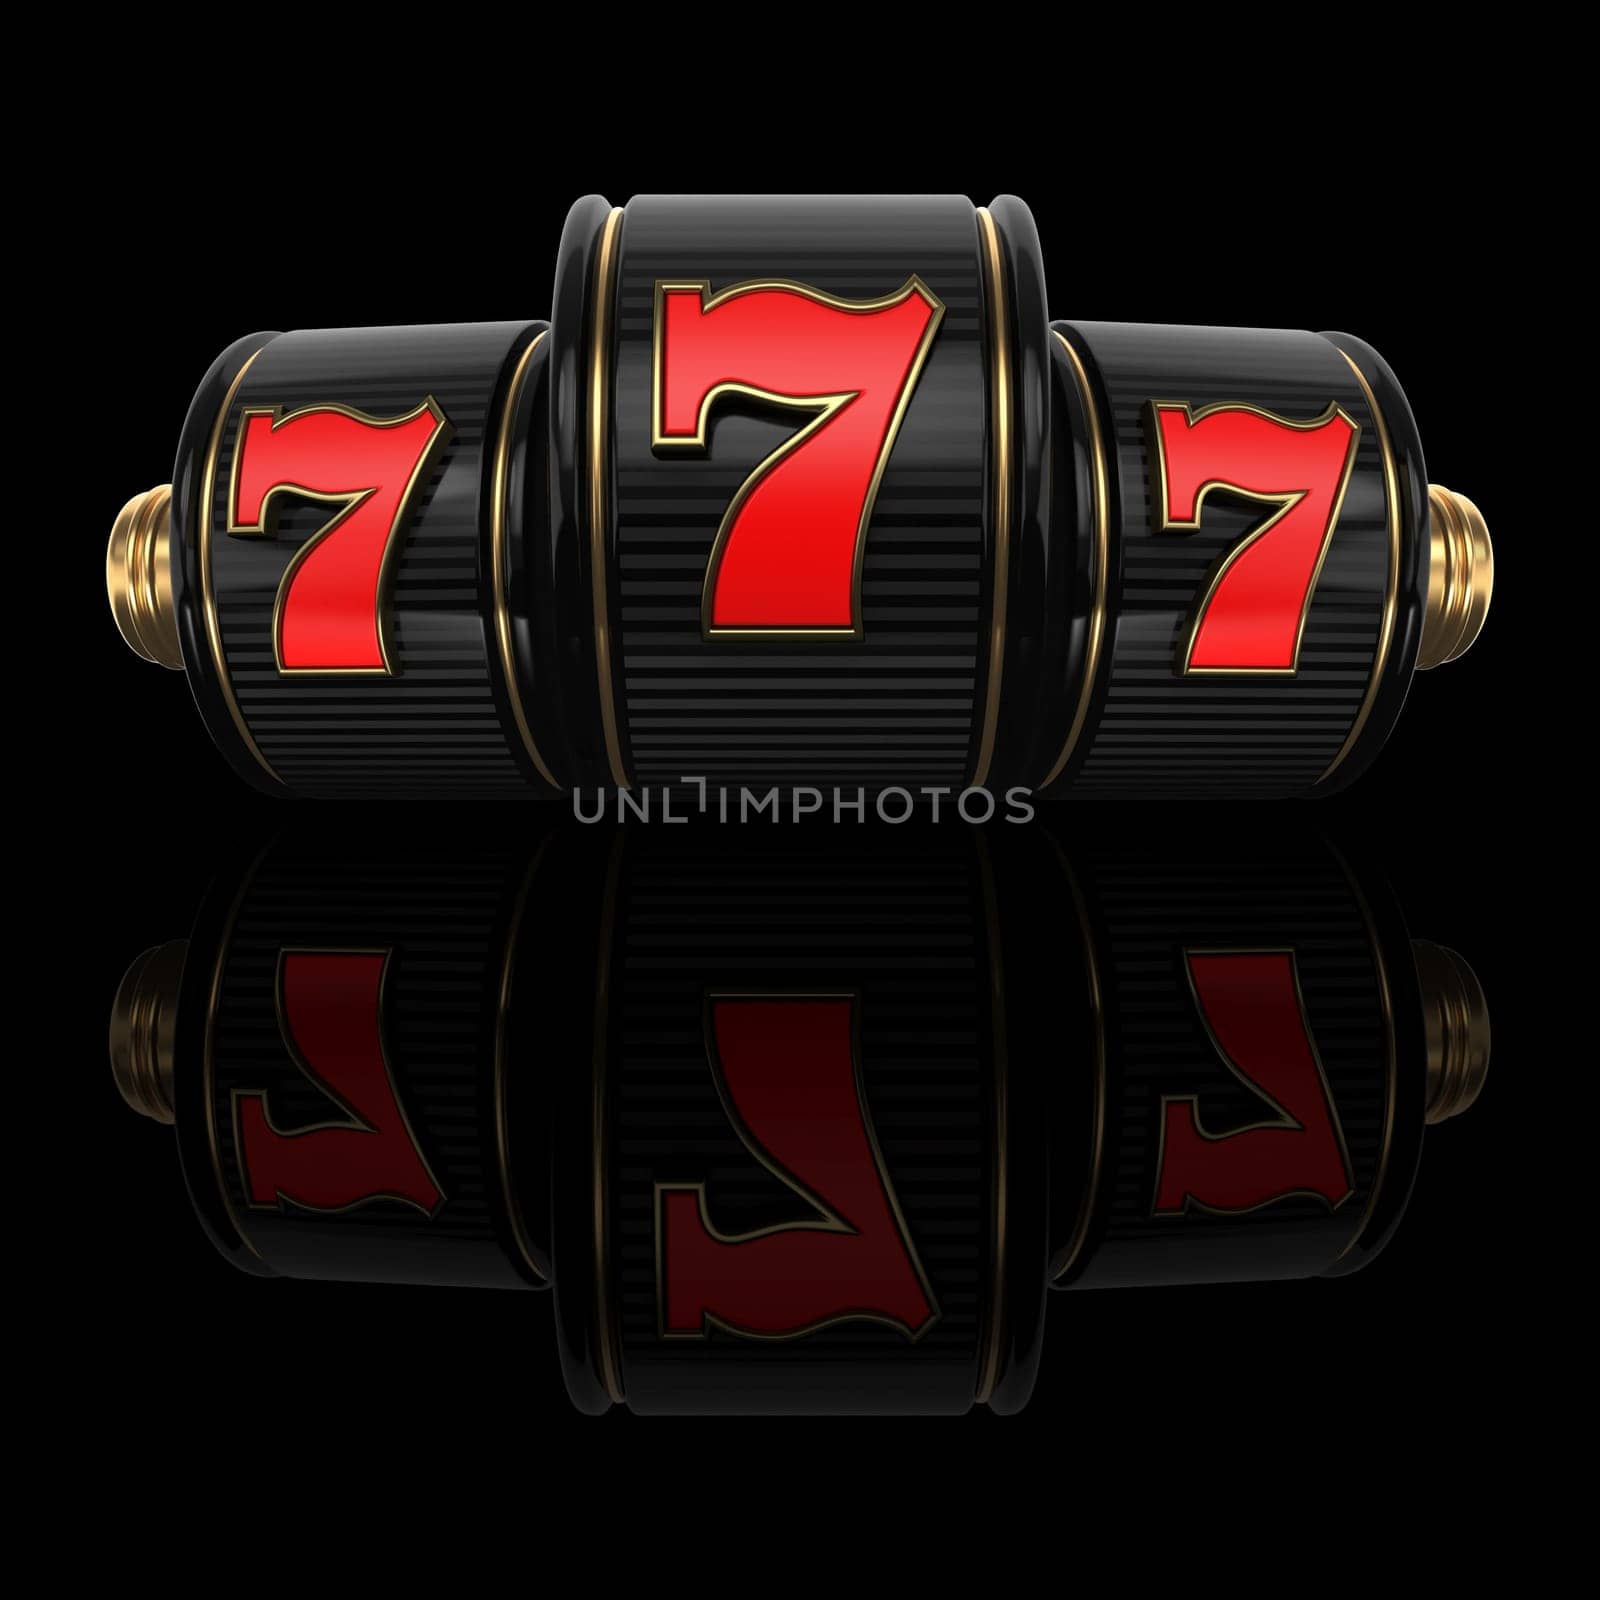 Red 777 casino sign 3D rendering illustration isolated on black background